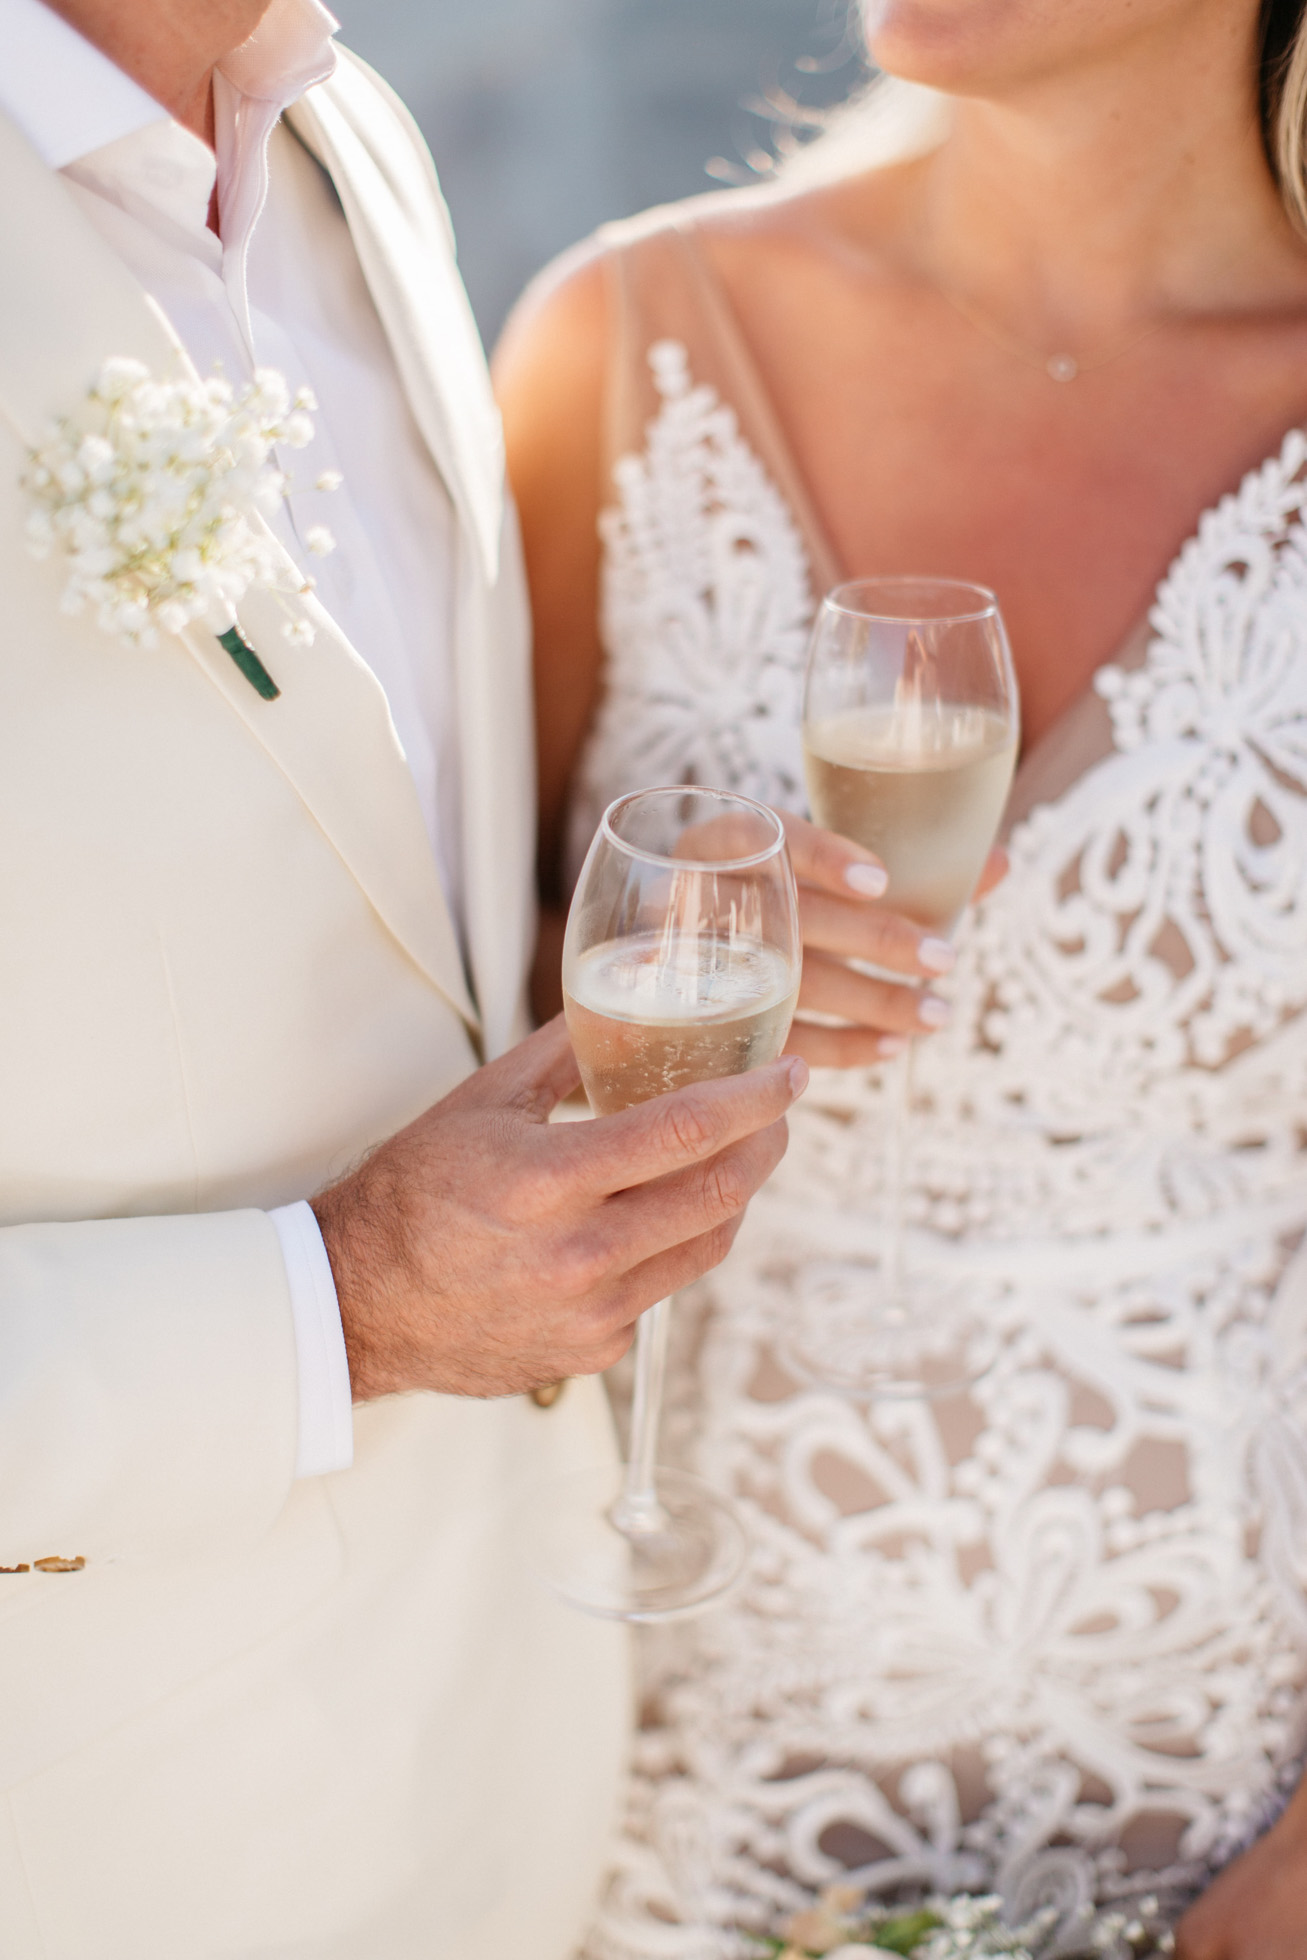 Wedding champagne toast in Canaves Suites Oia Santorini.